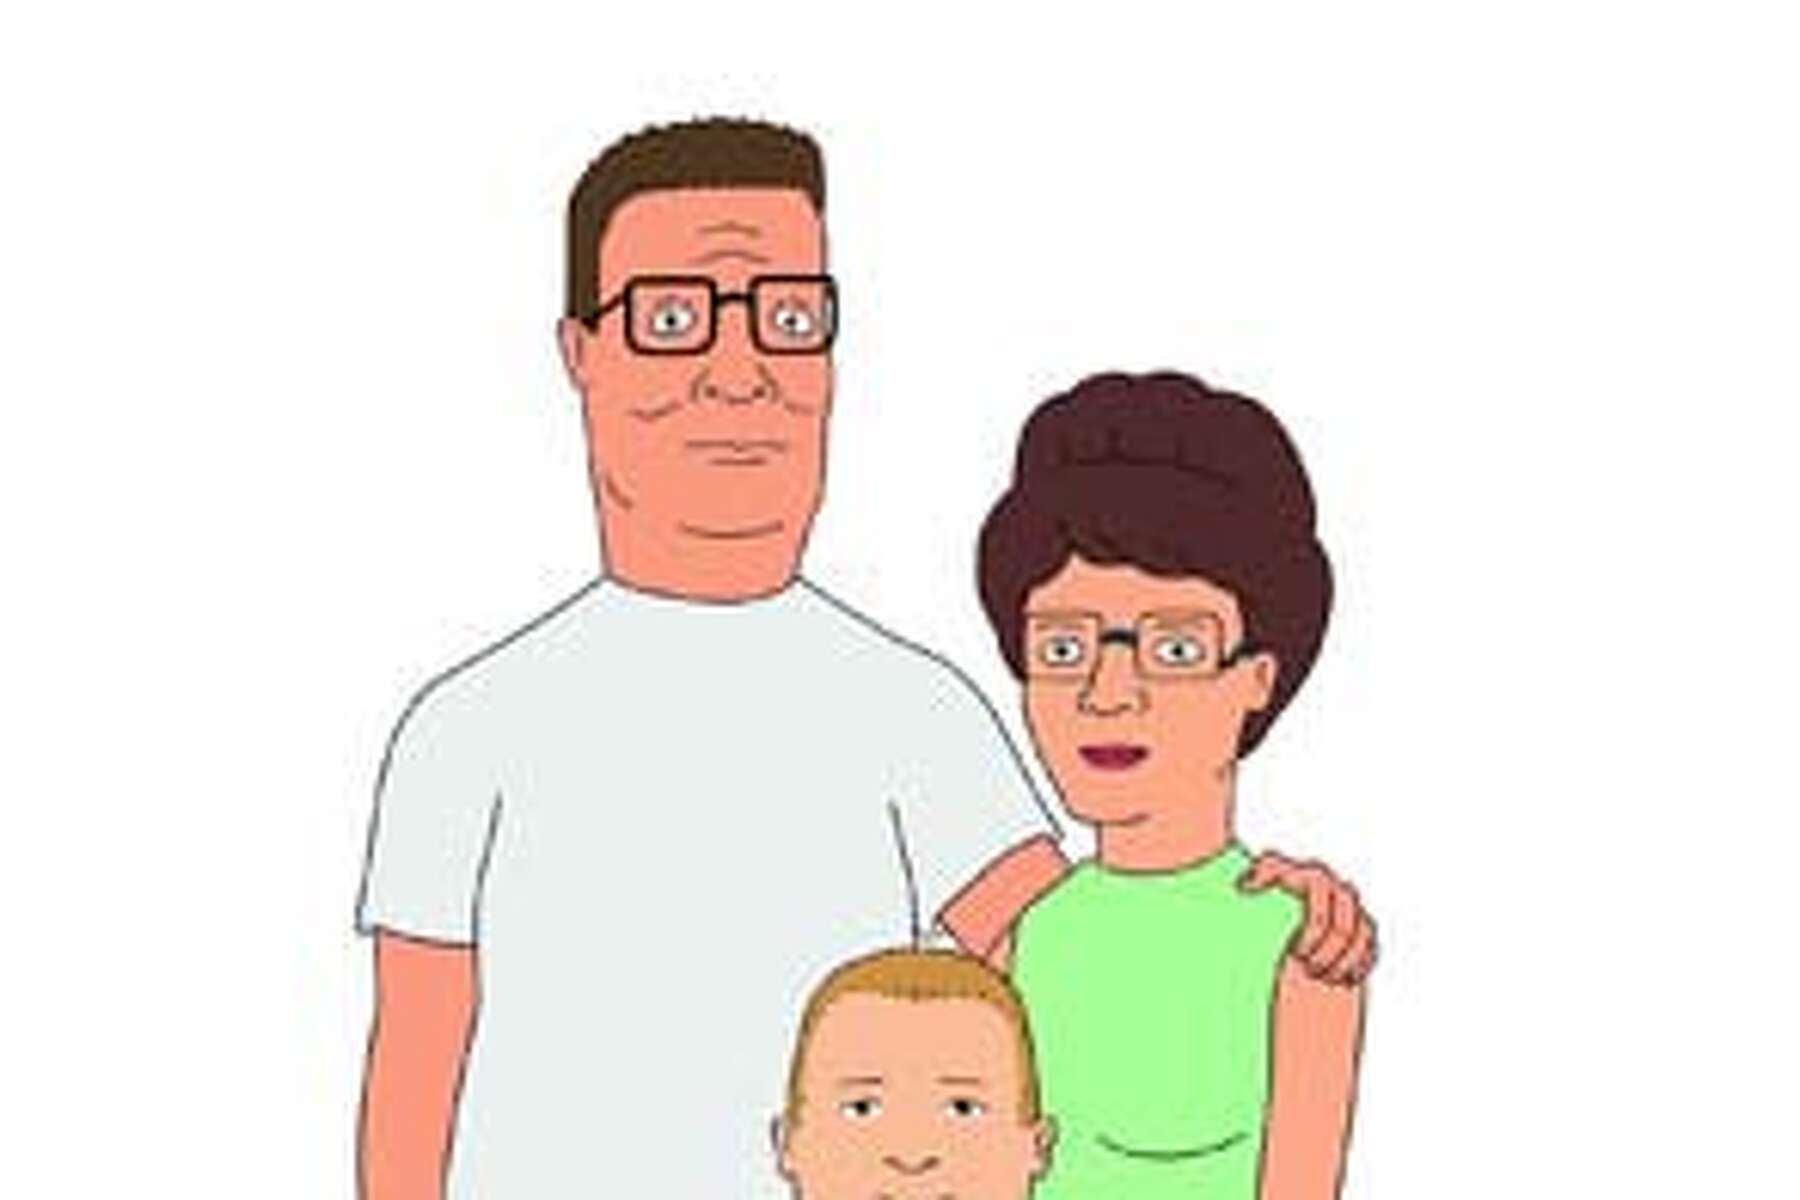 Hank and peggy hill